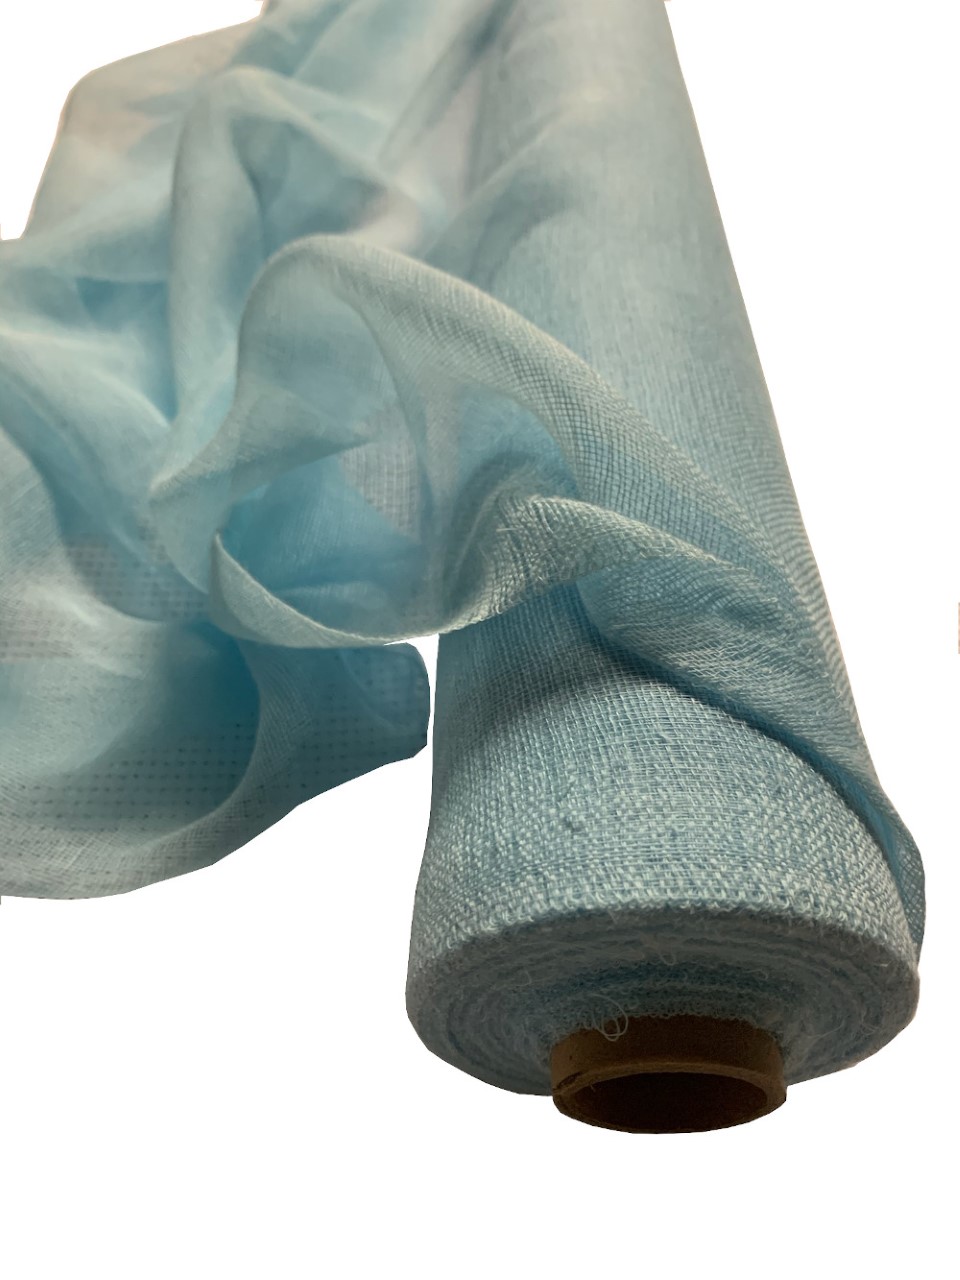 36" Light Blue Cheesecloth 100 Foot Roll - 100% Cotton